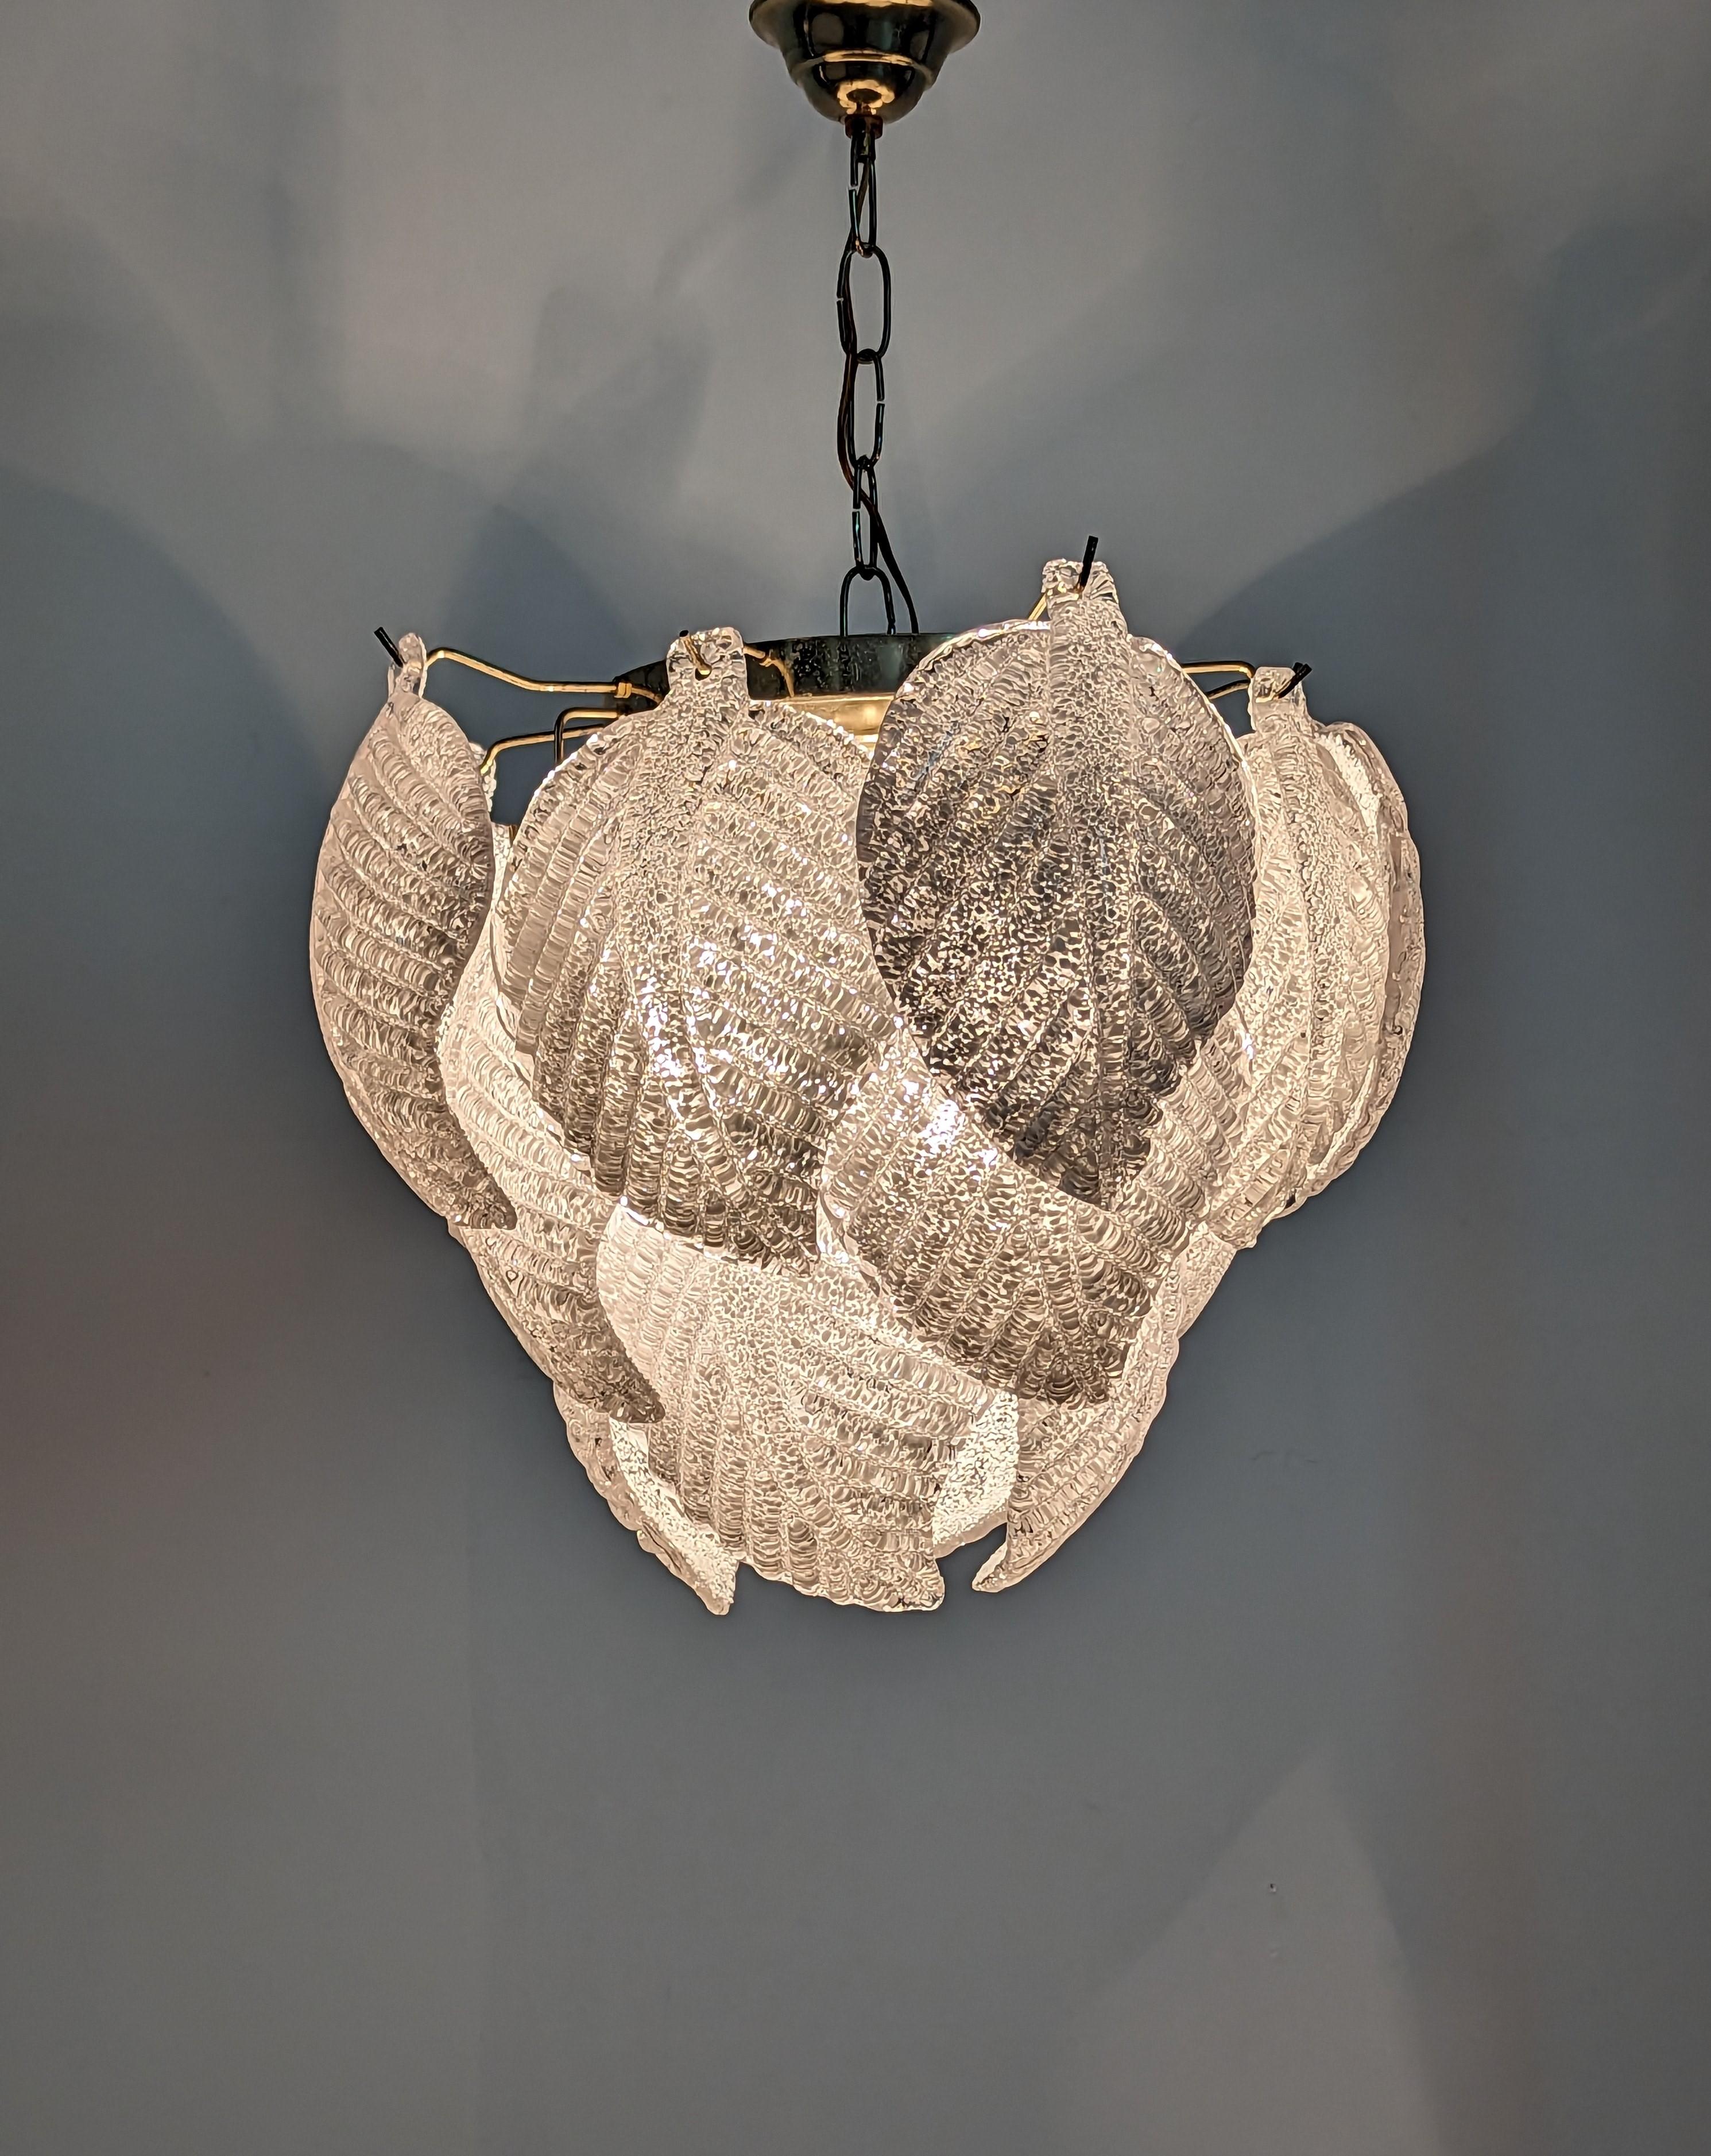 Lamp with large leaves made of Murano glass and white textured inside for elegant and super pleasant lighting.

Dimensions: 35 cm high x 45 cm wide - Total length: 65 cm